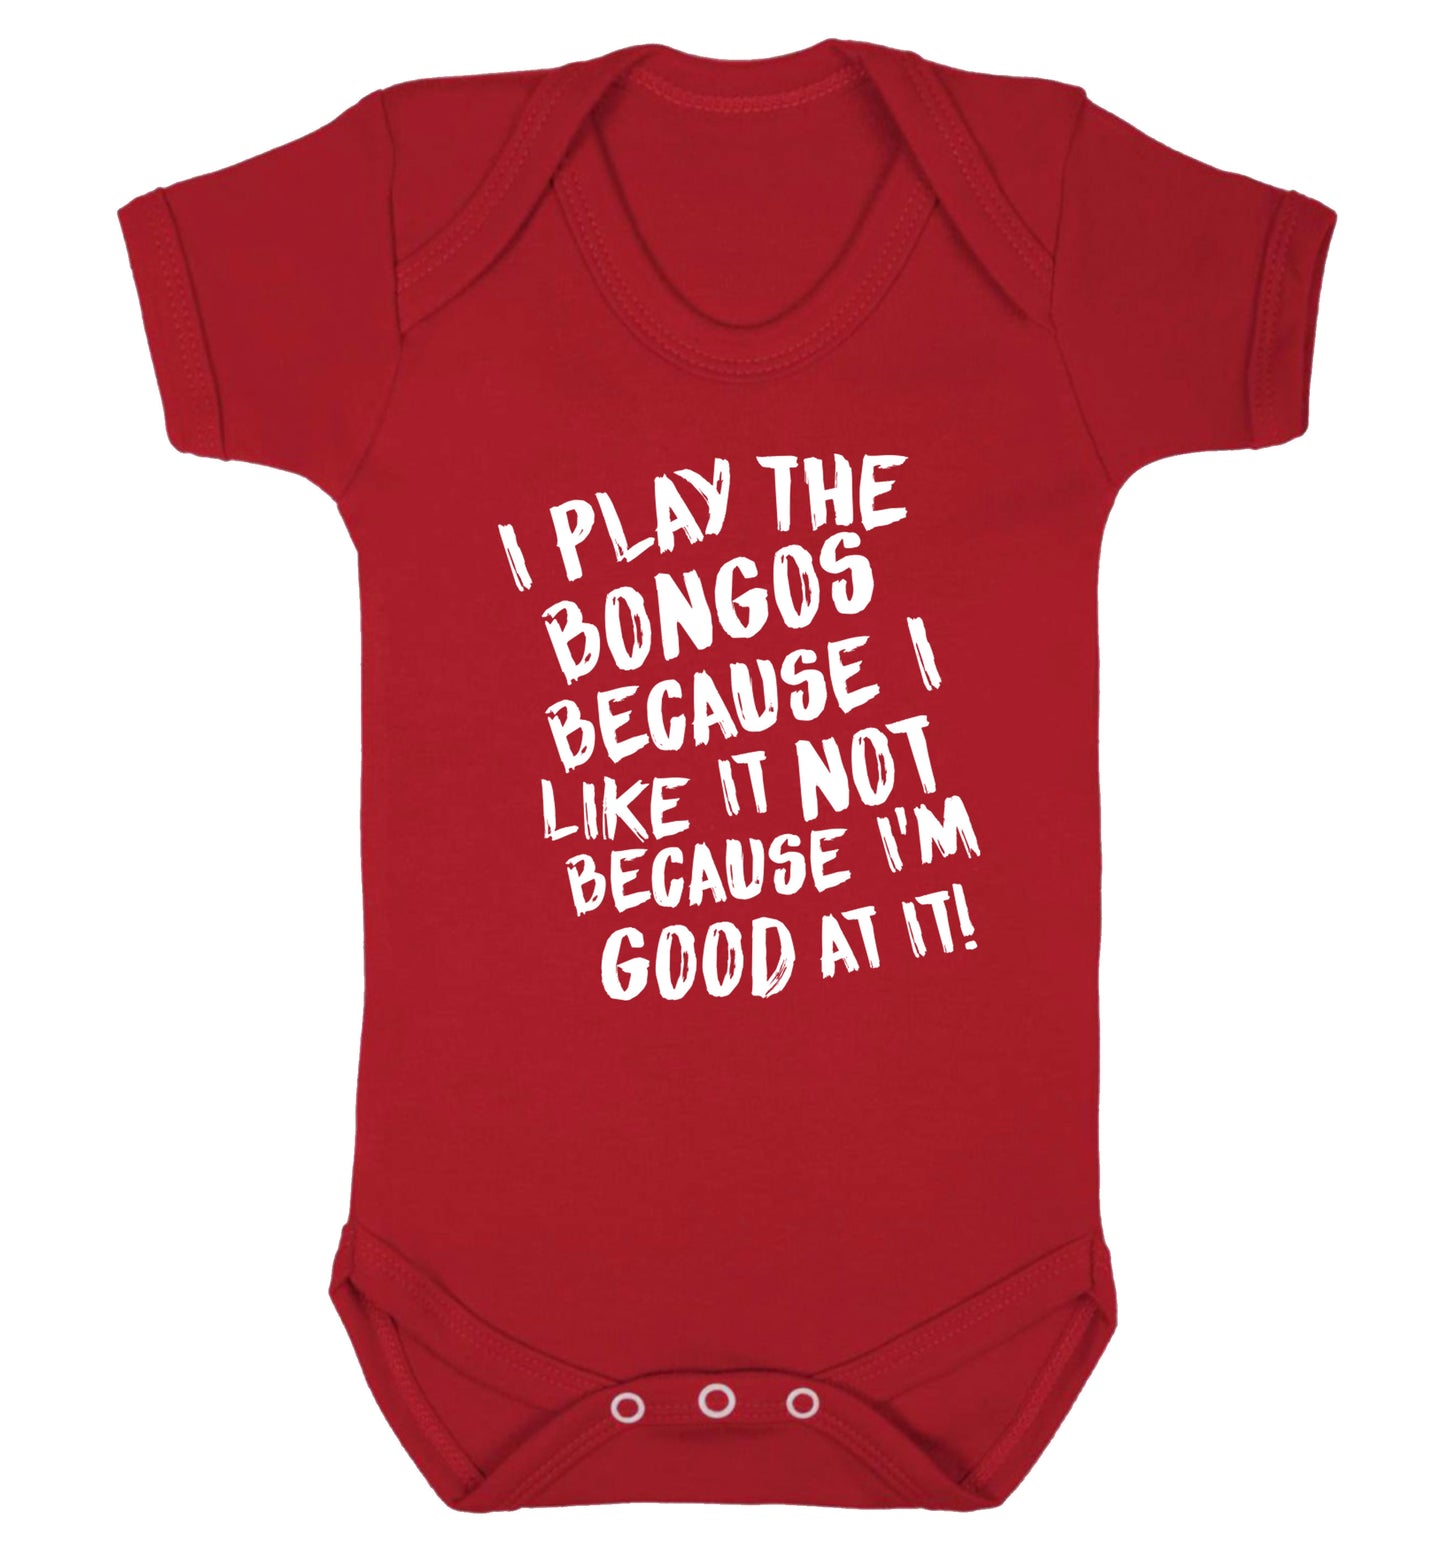 I play the bongos because I like it not because I'm good at it Baby Vest red 18-24 months